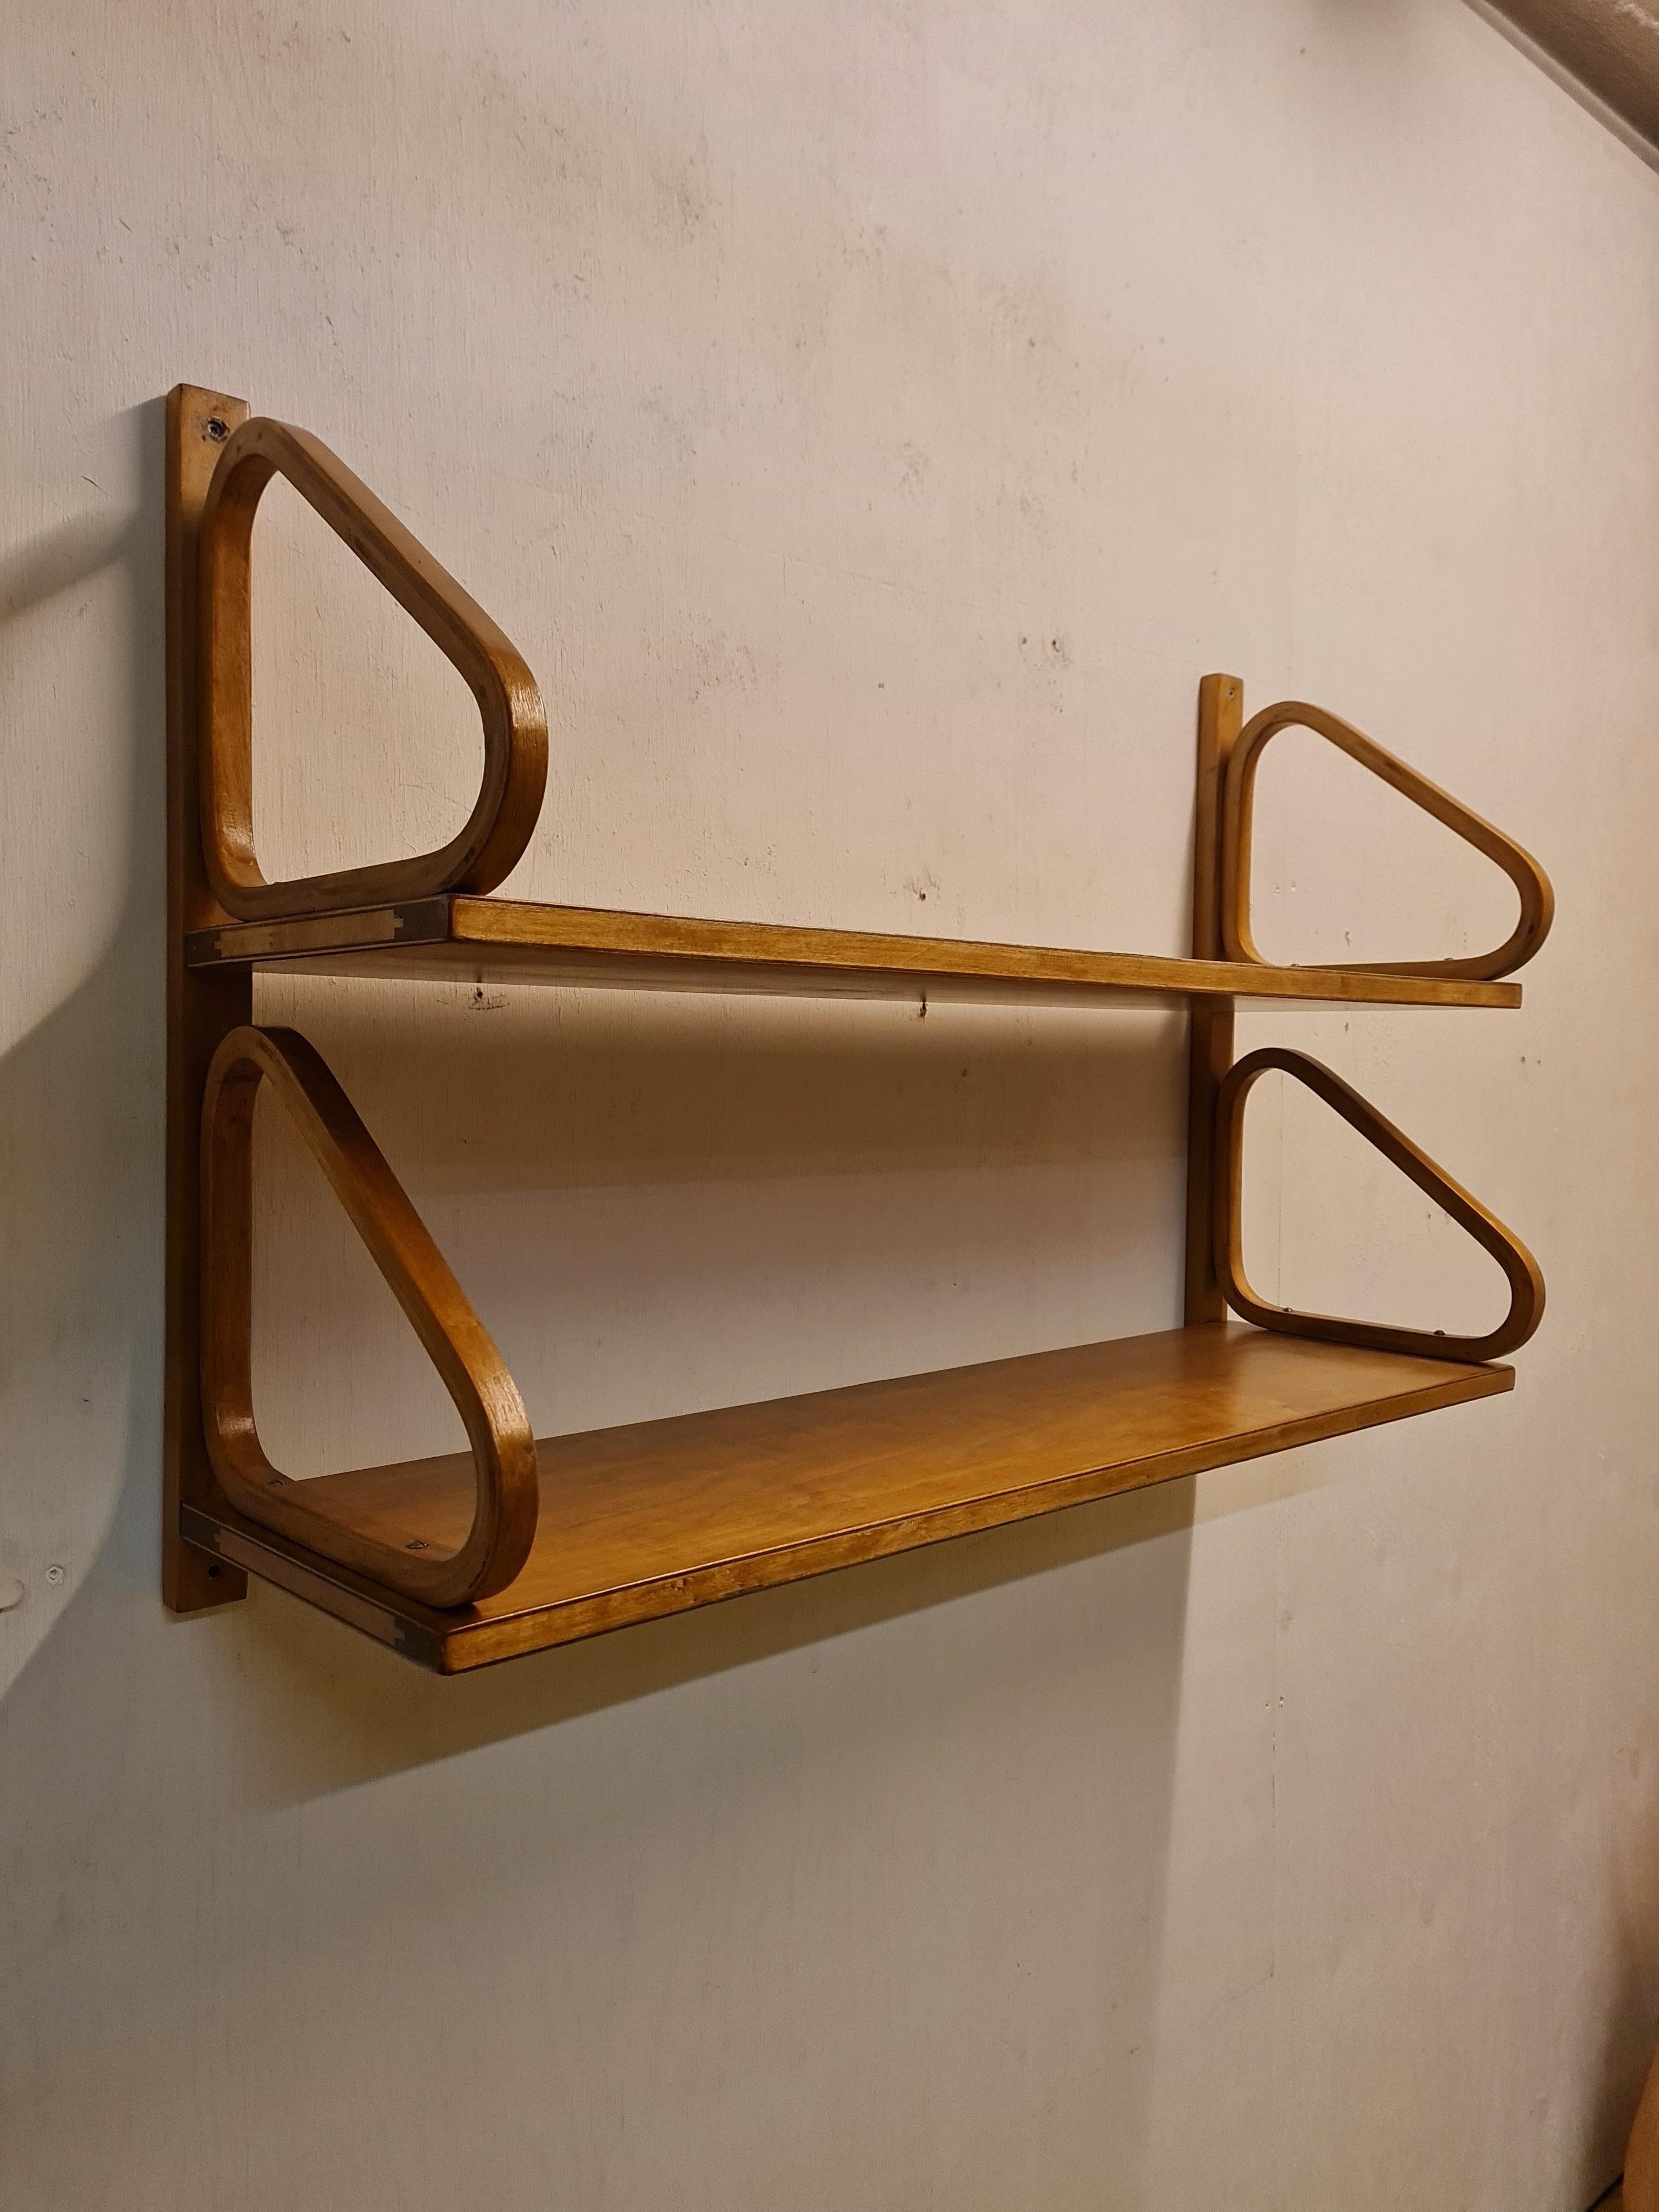 The iconic minimalist shelf by Alvar Aalto in double deck. Due to the back rail, the shelf is easier to hang with four screws instead of eight.
The shelf unit is pre mid 1950s and is made with finger joints. Beautiful patina that came alive with the